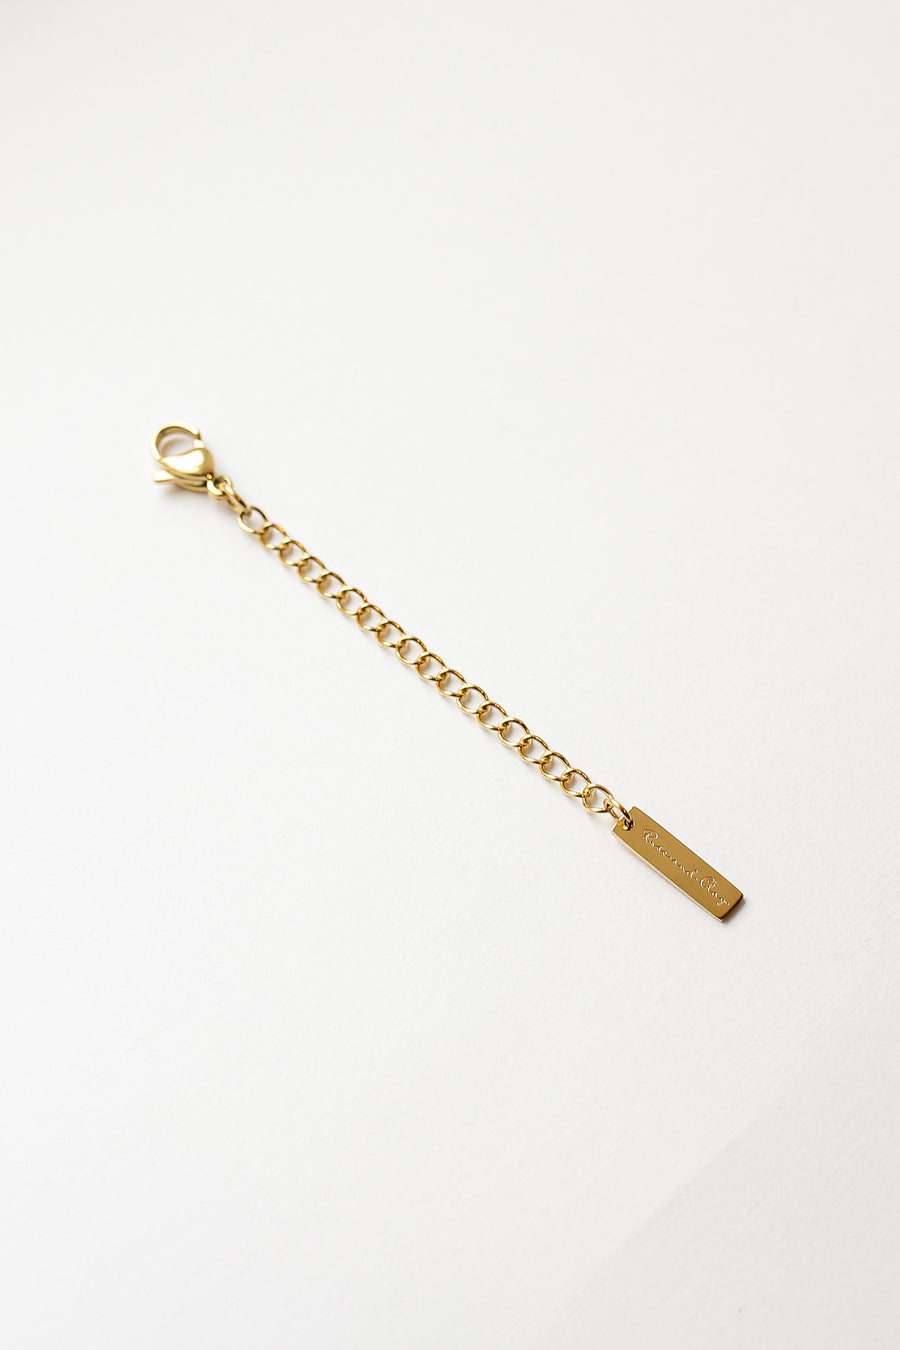 Jewelry Extender Chain in Gold